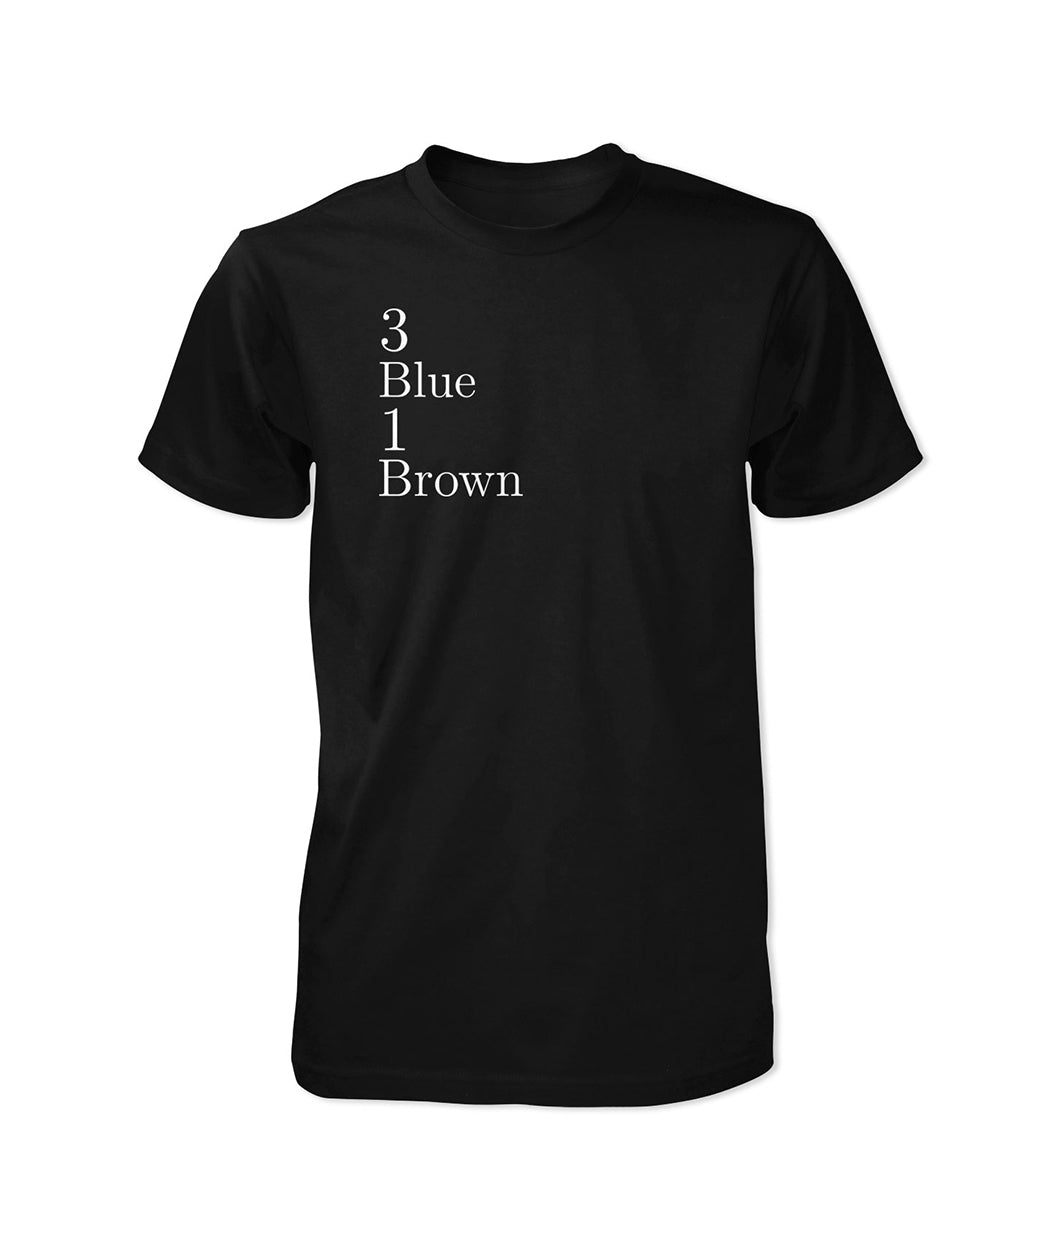 Black t-shirt with "3 Blue 1 Brown" on the top left of the shirt written in white serif font - from 3 blue 1 brown